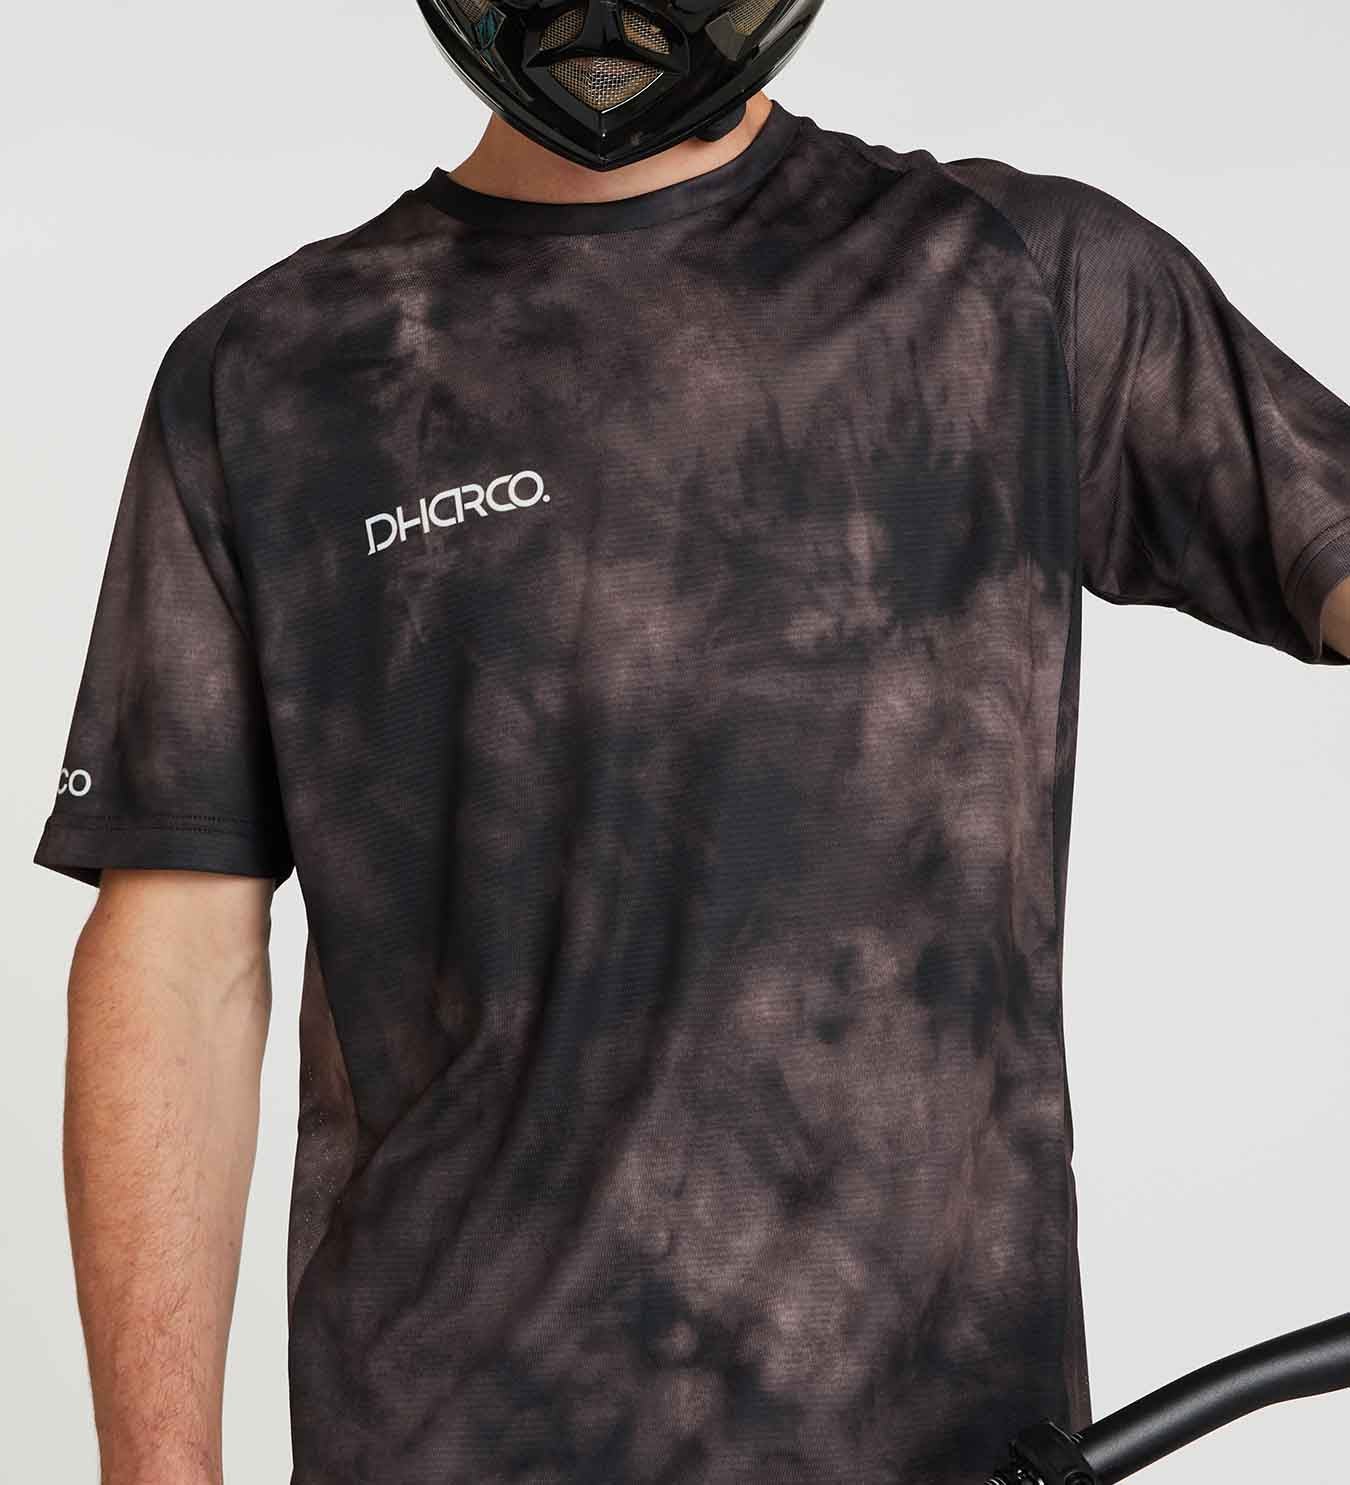 DHaRCO Mens SS Jersey Driftwood xccscss.